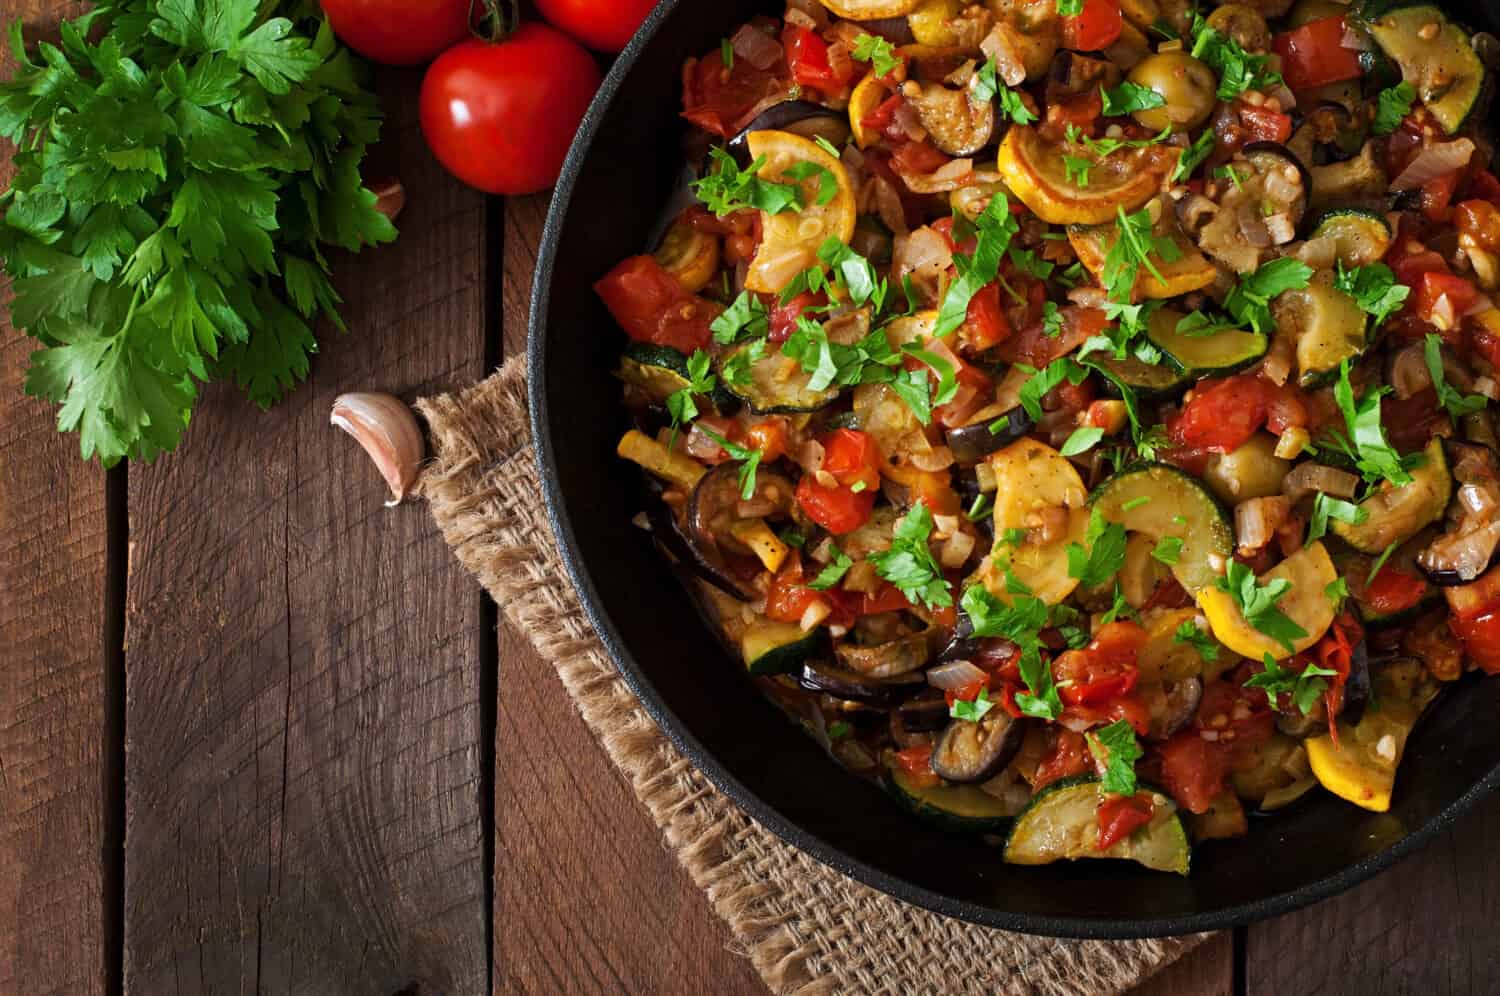 Vegetable Ratatouille in frying pan on a wooden table. Top view